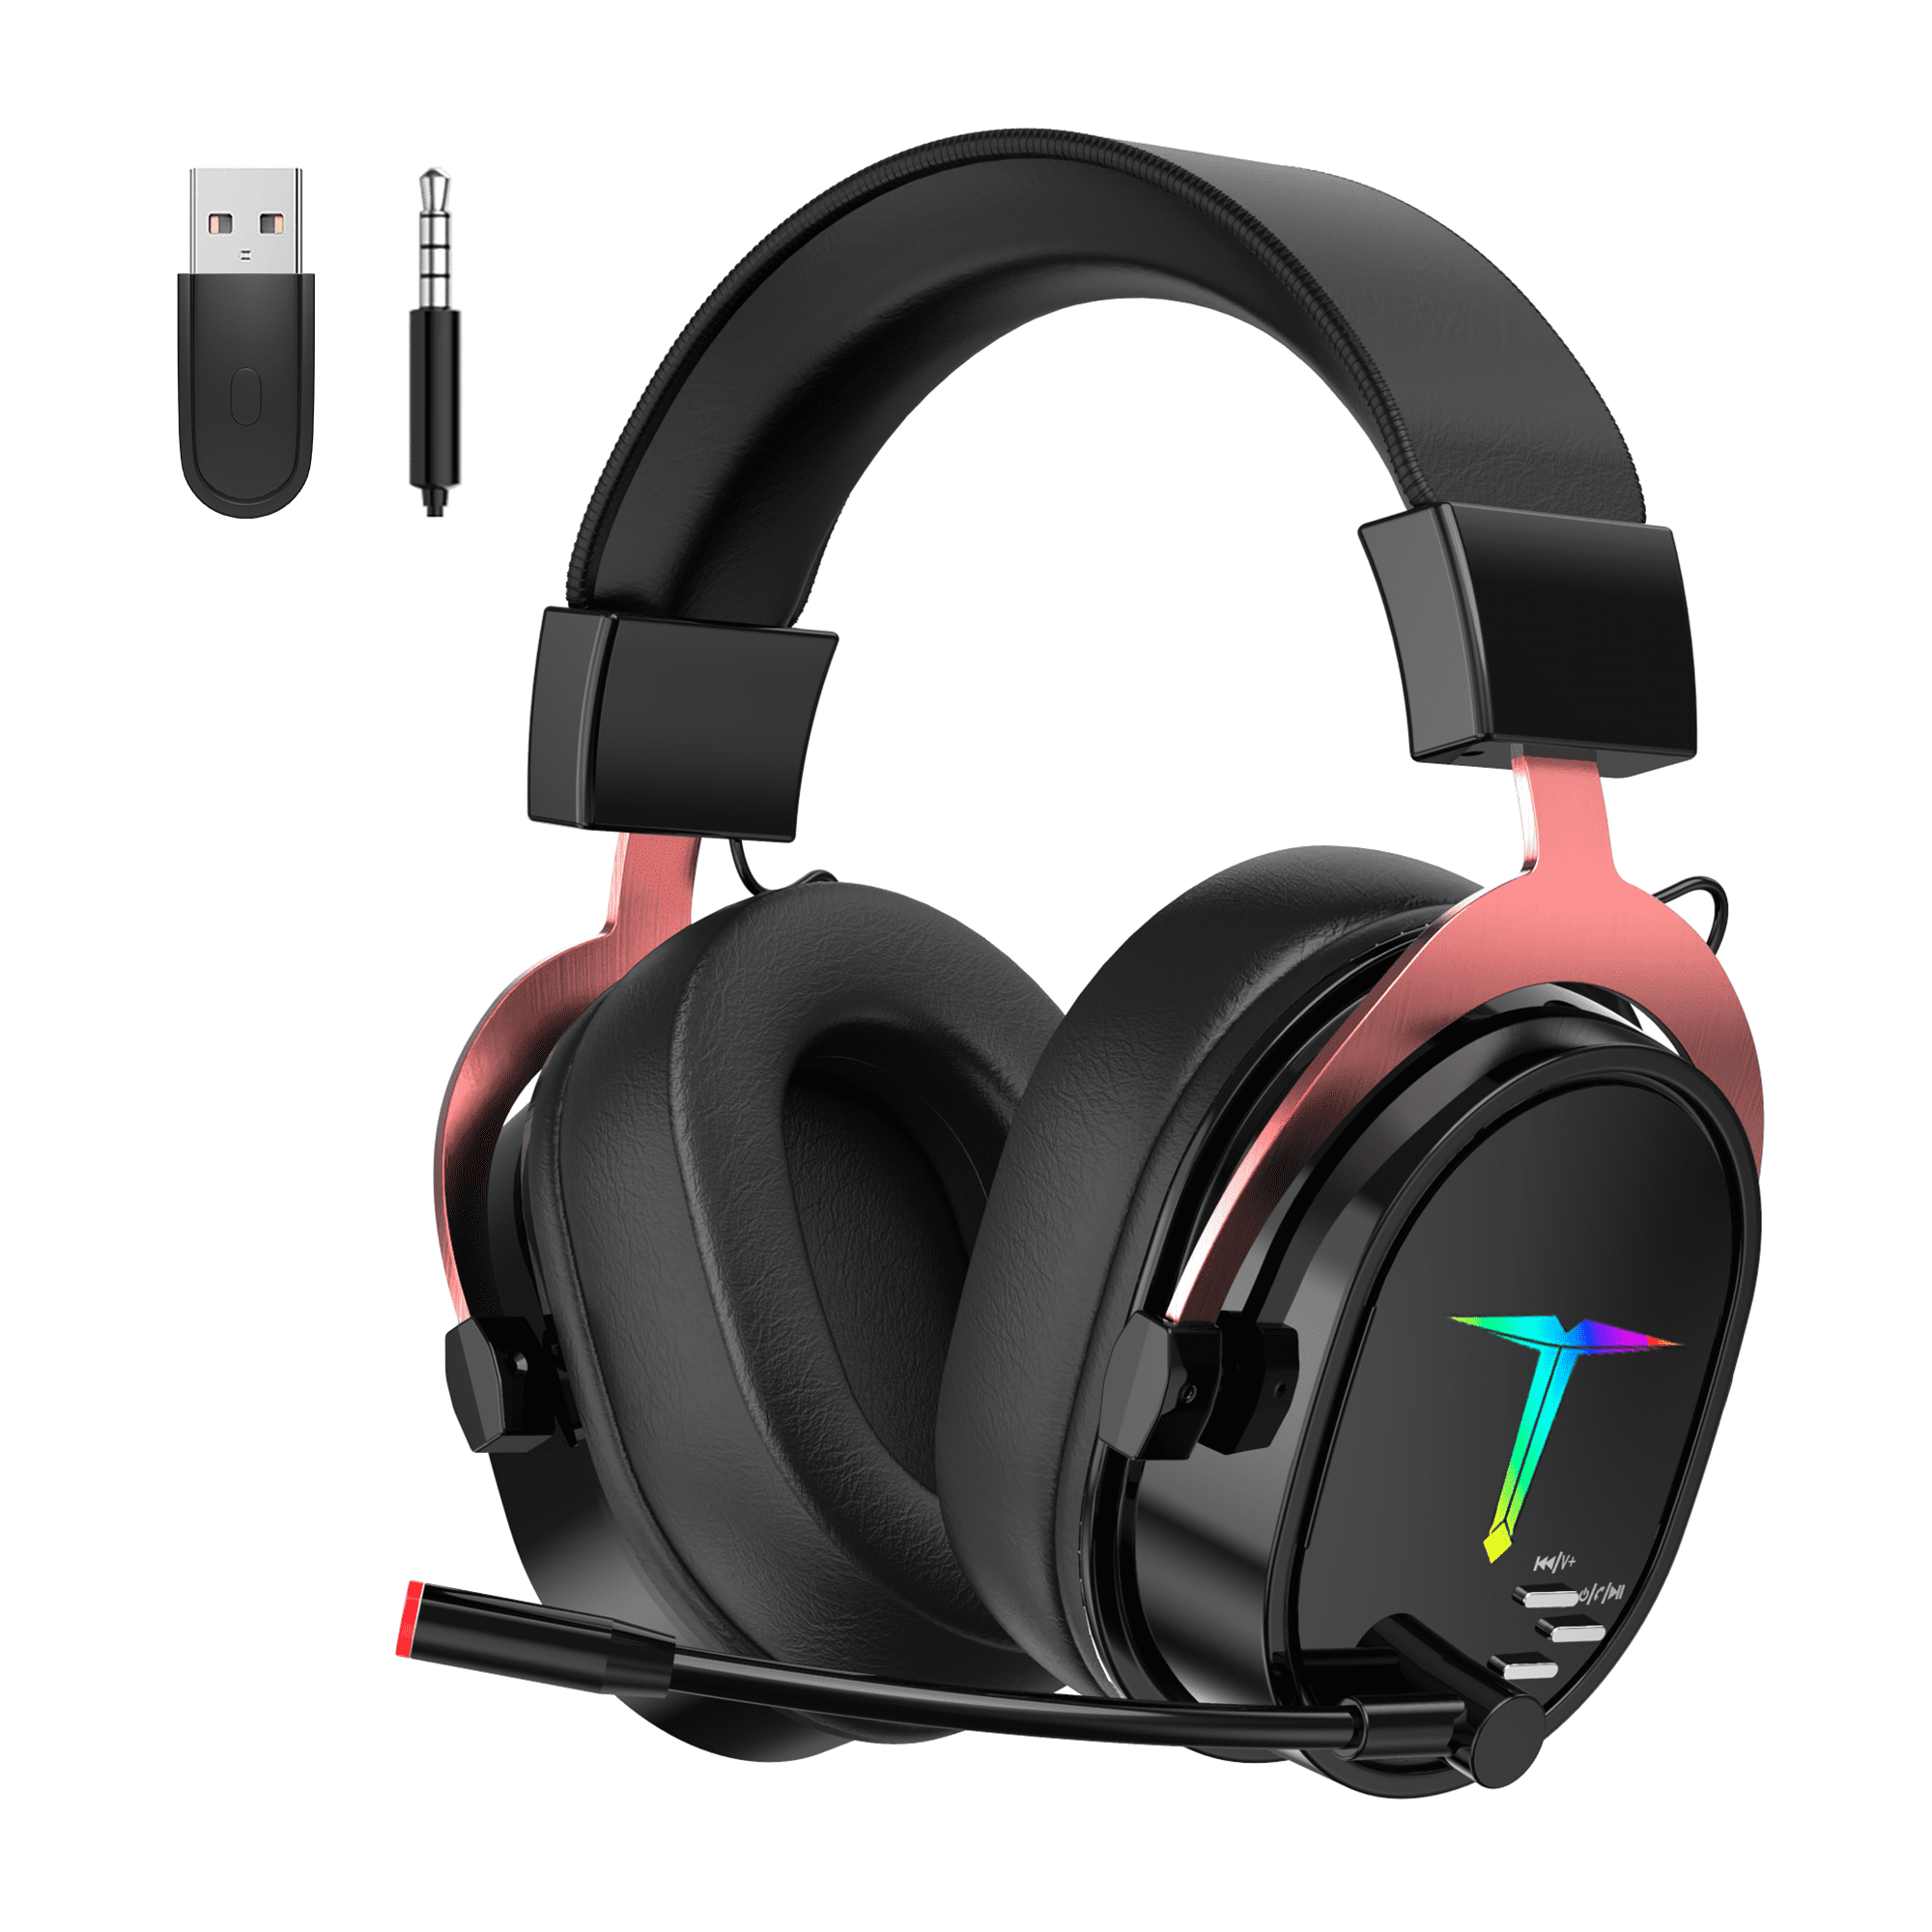 UHM Gaming Headset Wireless for PC/PS4/PS5/ Nintendo Switch,Over Ear 2.4G/Bluetooth Gaming Headphones with Noise-Canceling Mic 7.1 Surround Sound, 3.5mm Wired Mode for Xbox Series,Red